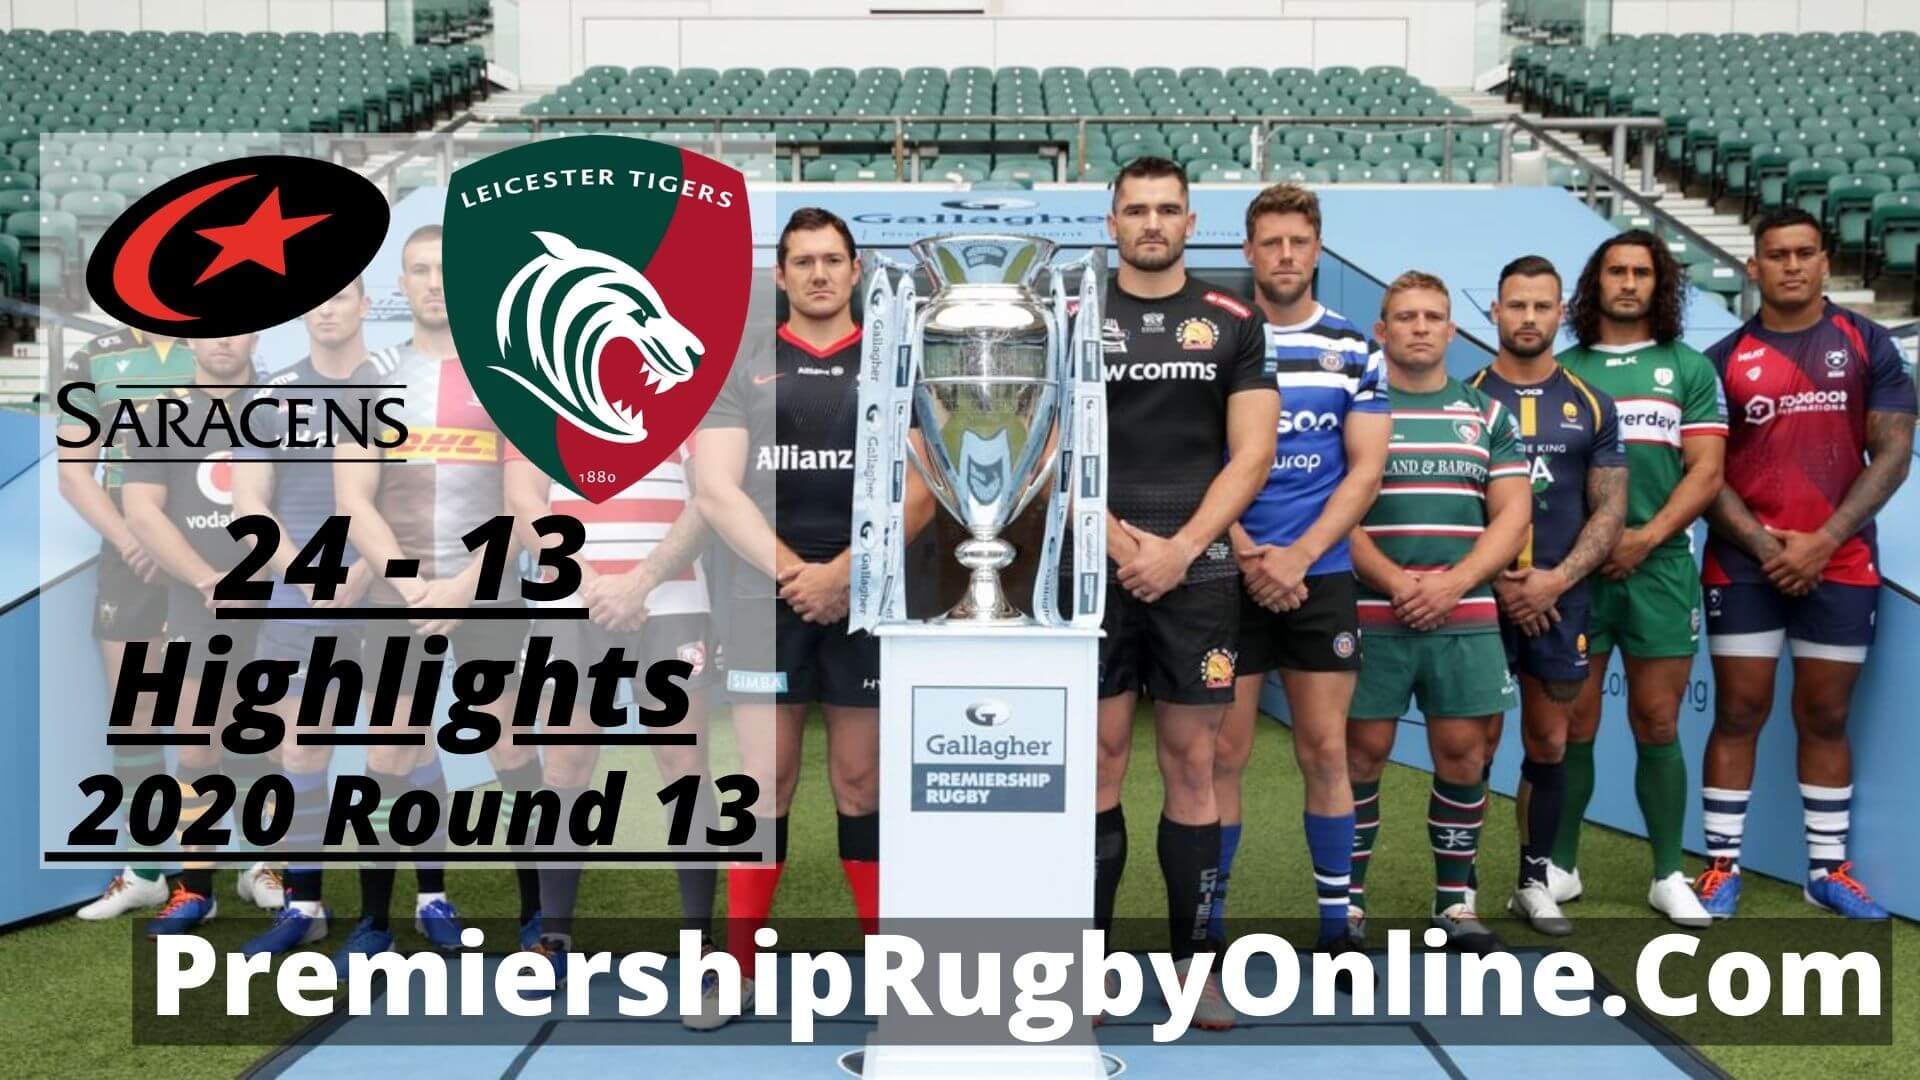 Saracens Vs Leicester Tigers Highlights 2020 RD 13